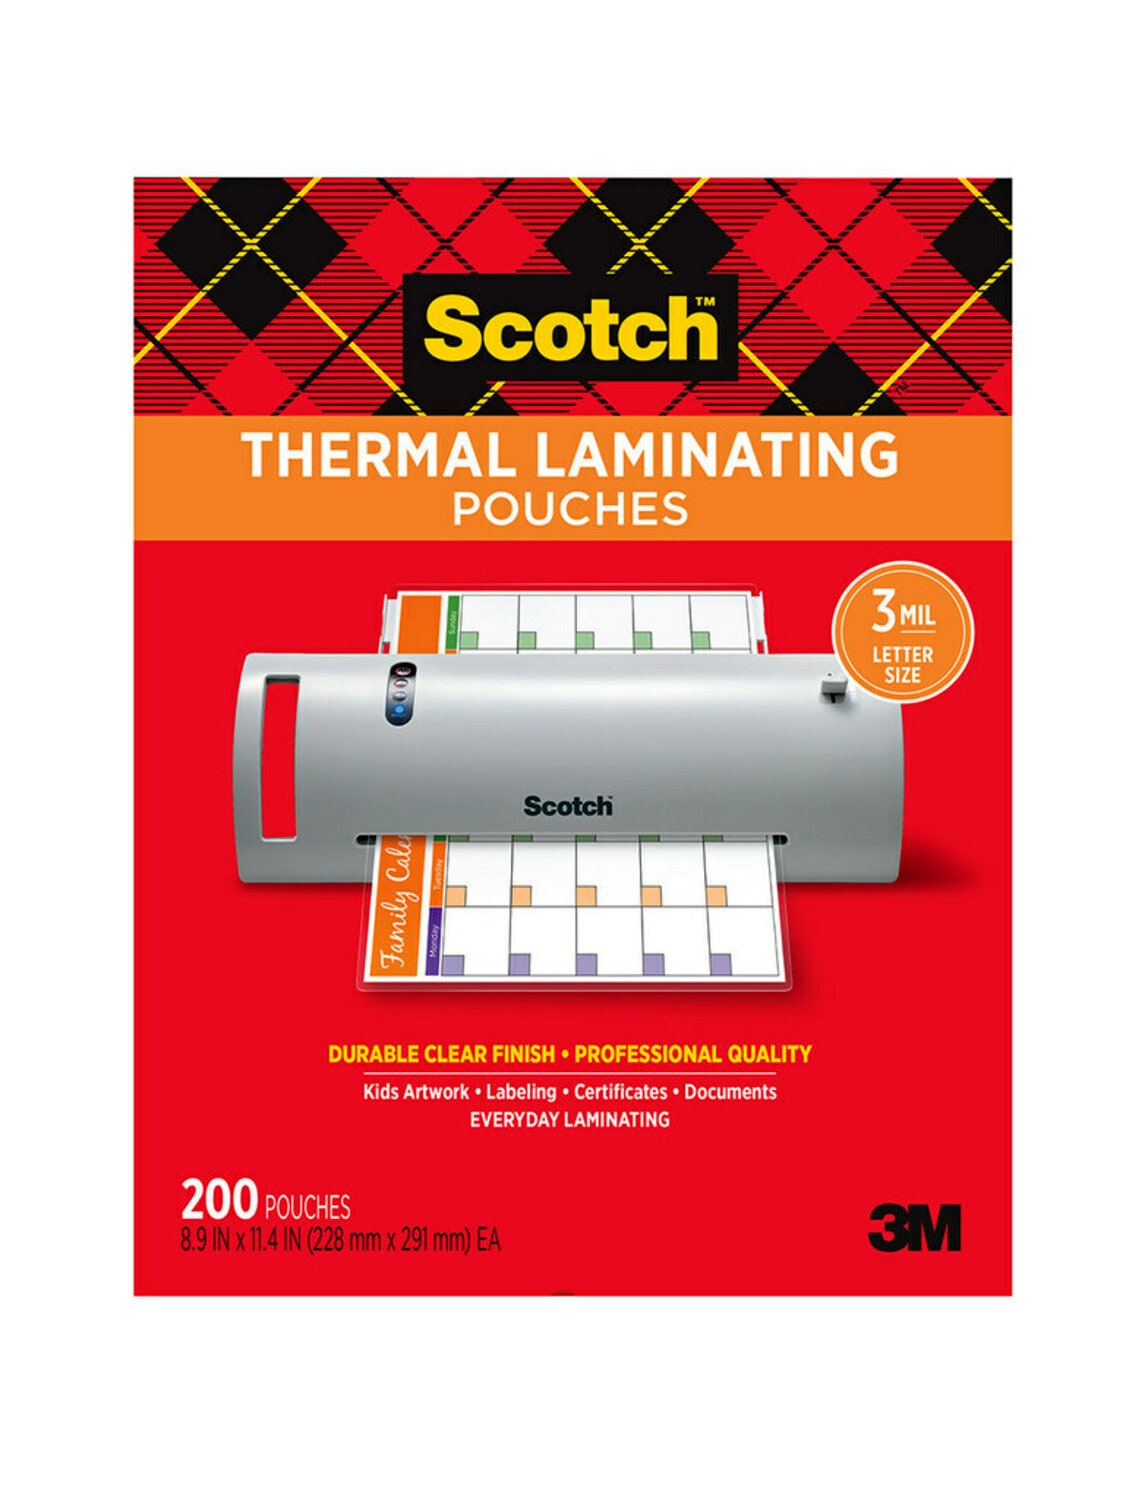 7100260723 - Scotch Thermal Pouches TP3854-200, 8.9 in x 11.4 in (228 mm x 291 mm)